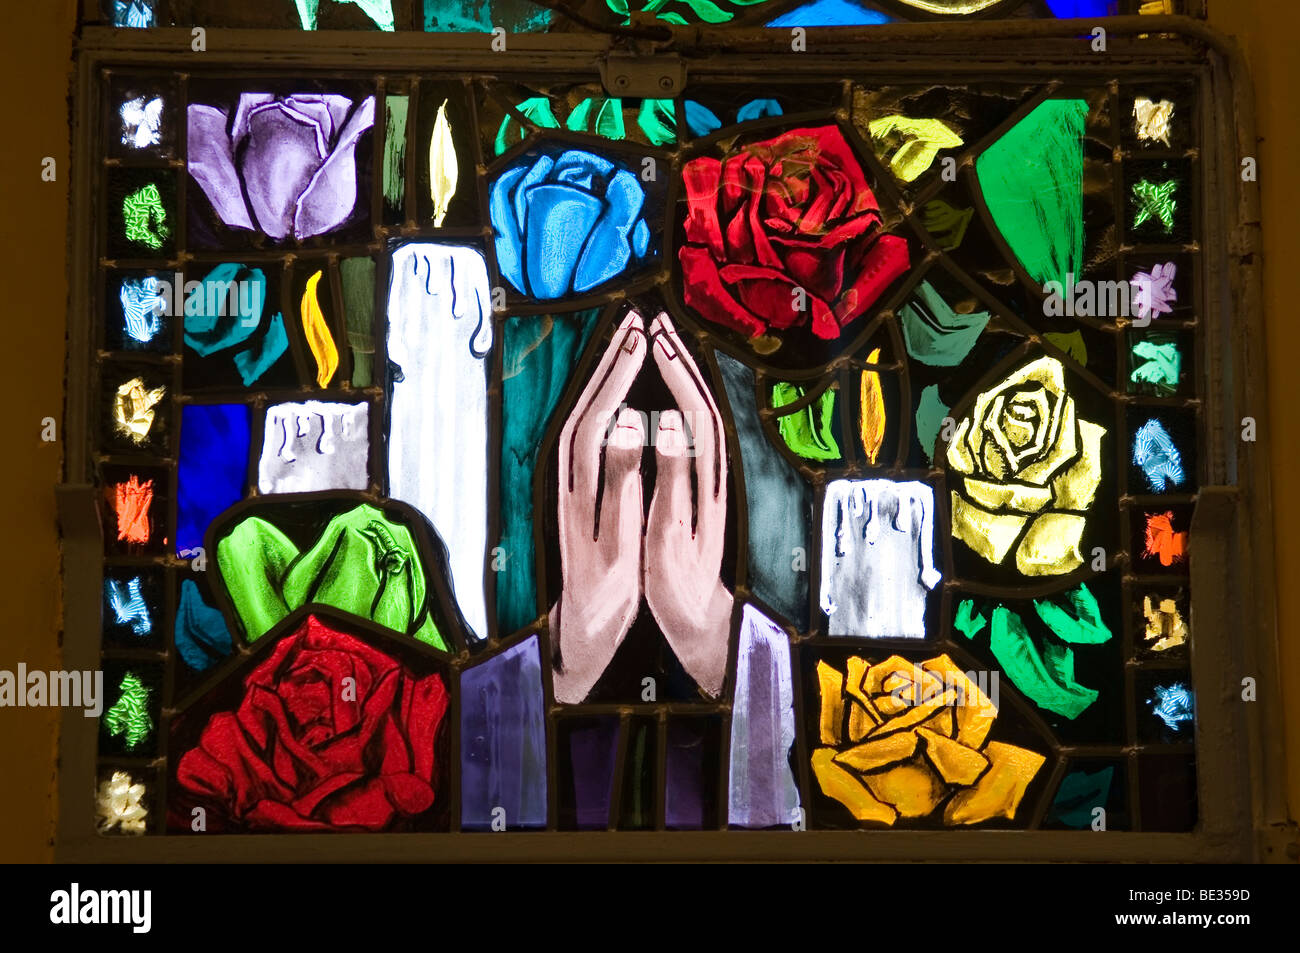 Stained window with clasped hands in sign of prayer, candles and colorful flowers Stock Photo